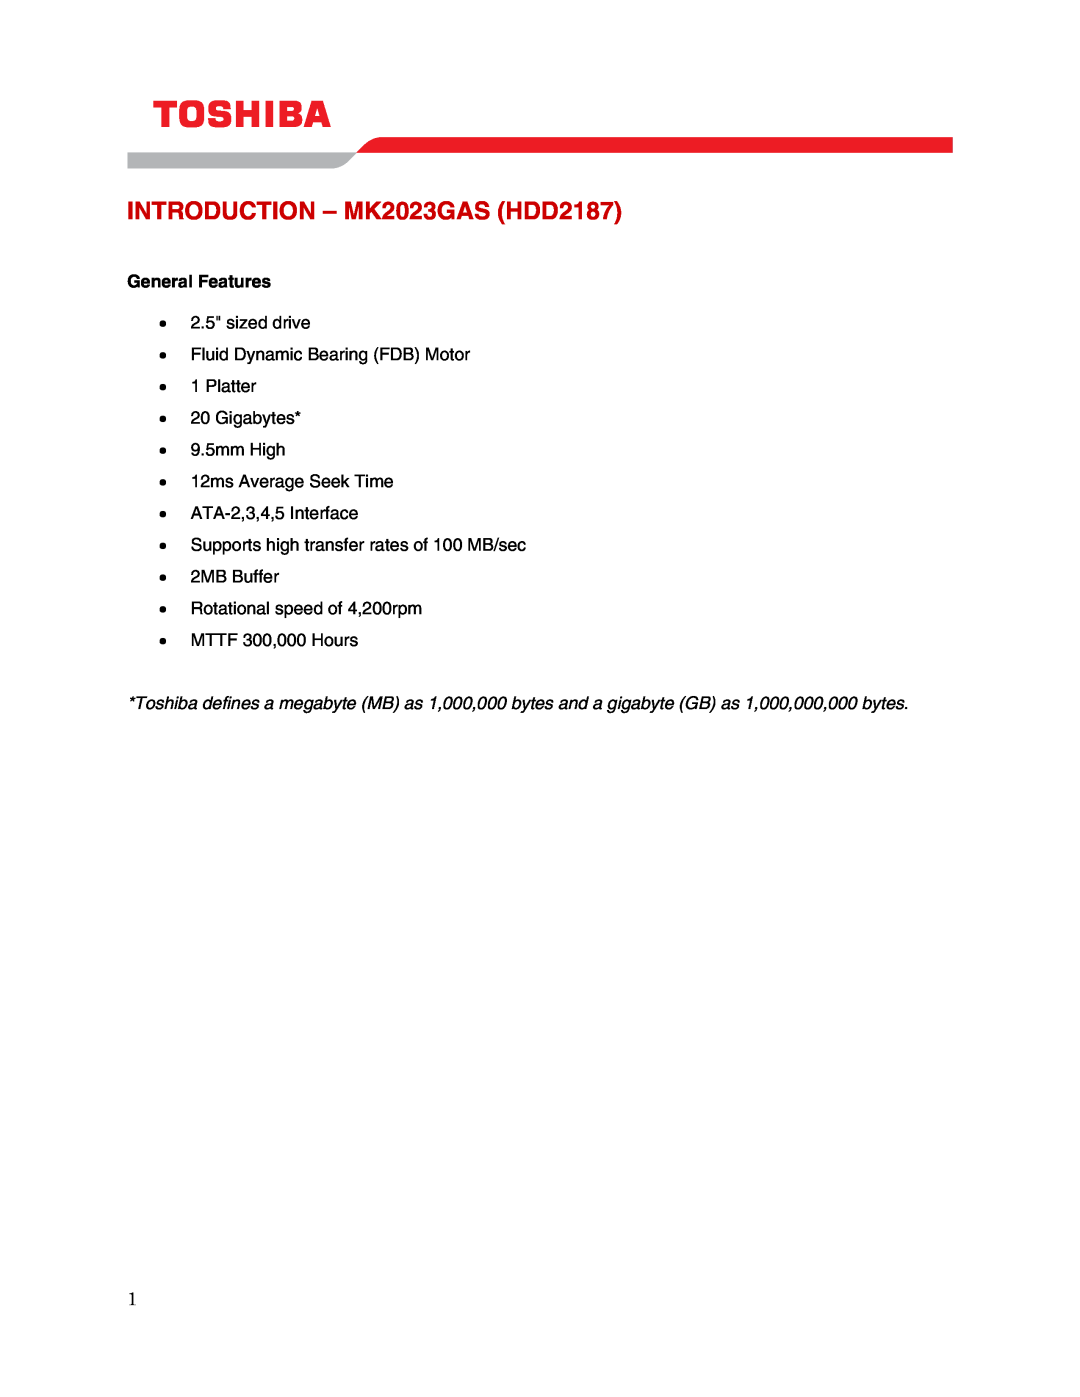 Toshiba user manual INTRODUCTION - MK2023GAS HDD2187, General Features 